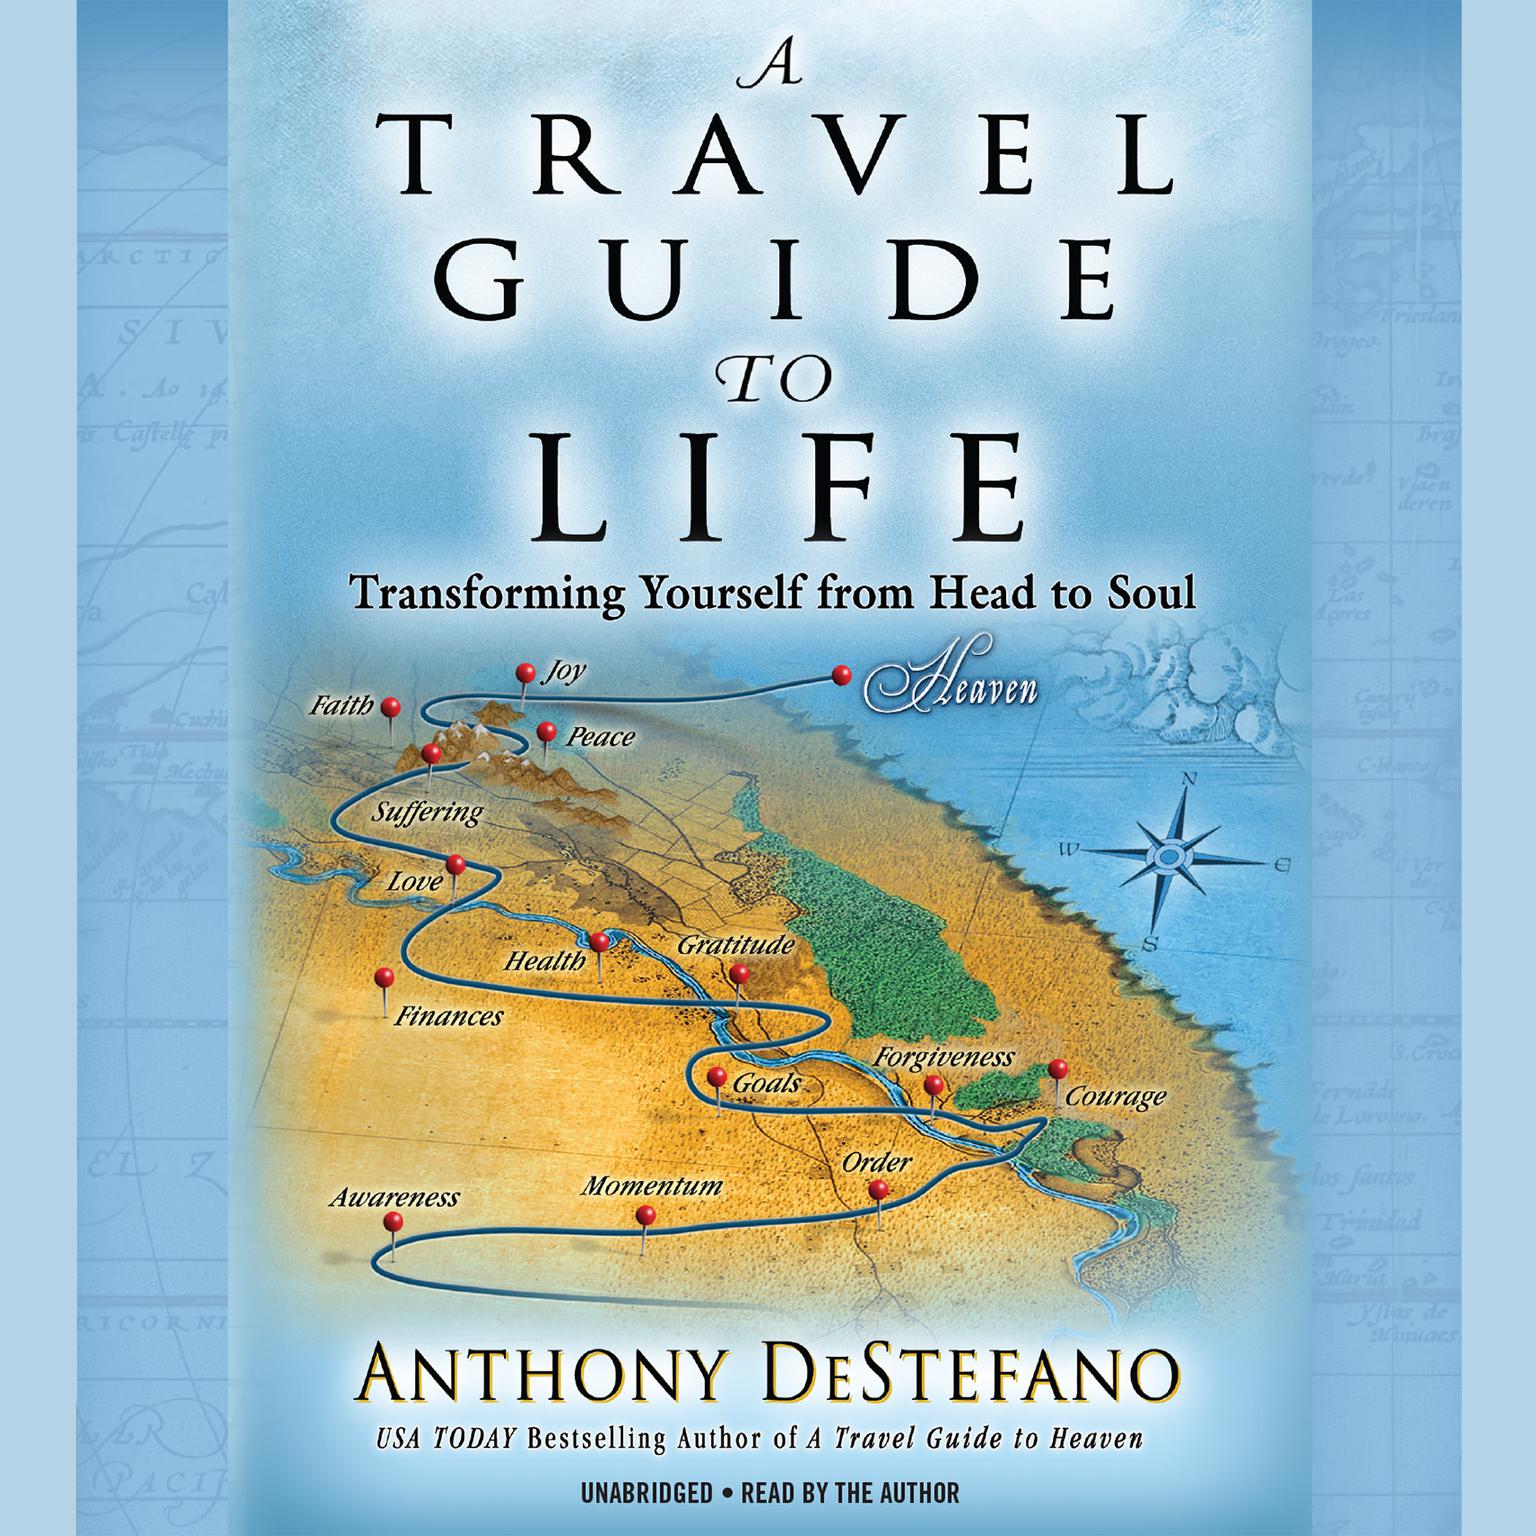 A Travel Guide to Life: Transforming Yourself from Head to Soul Audiobook, by Anthony DeStefano